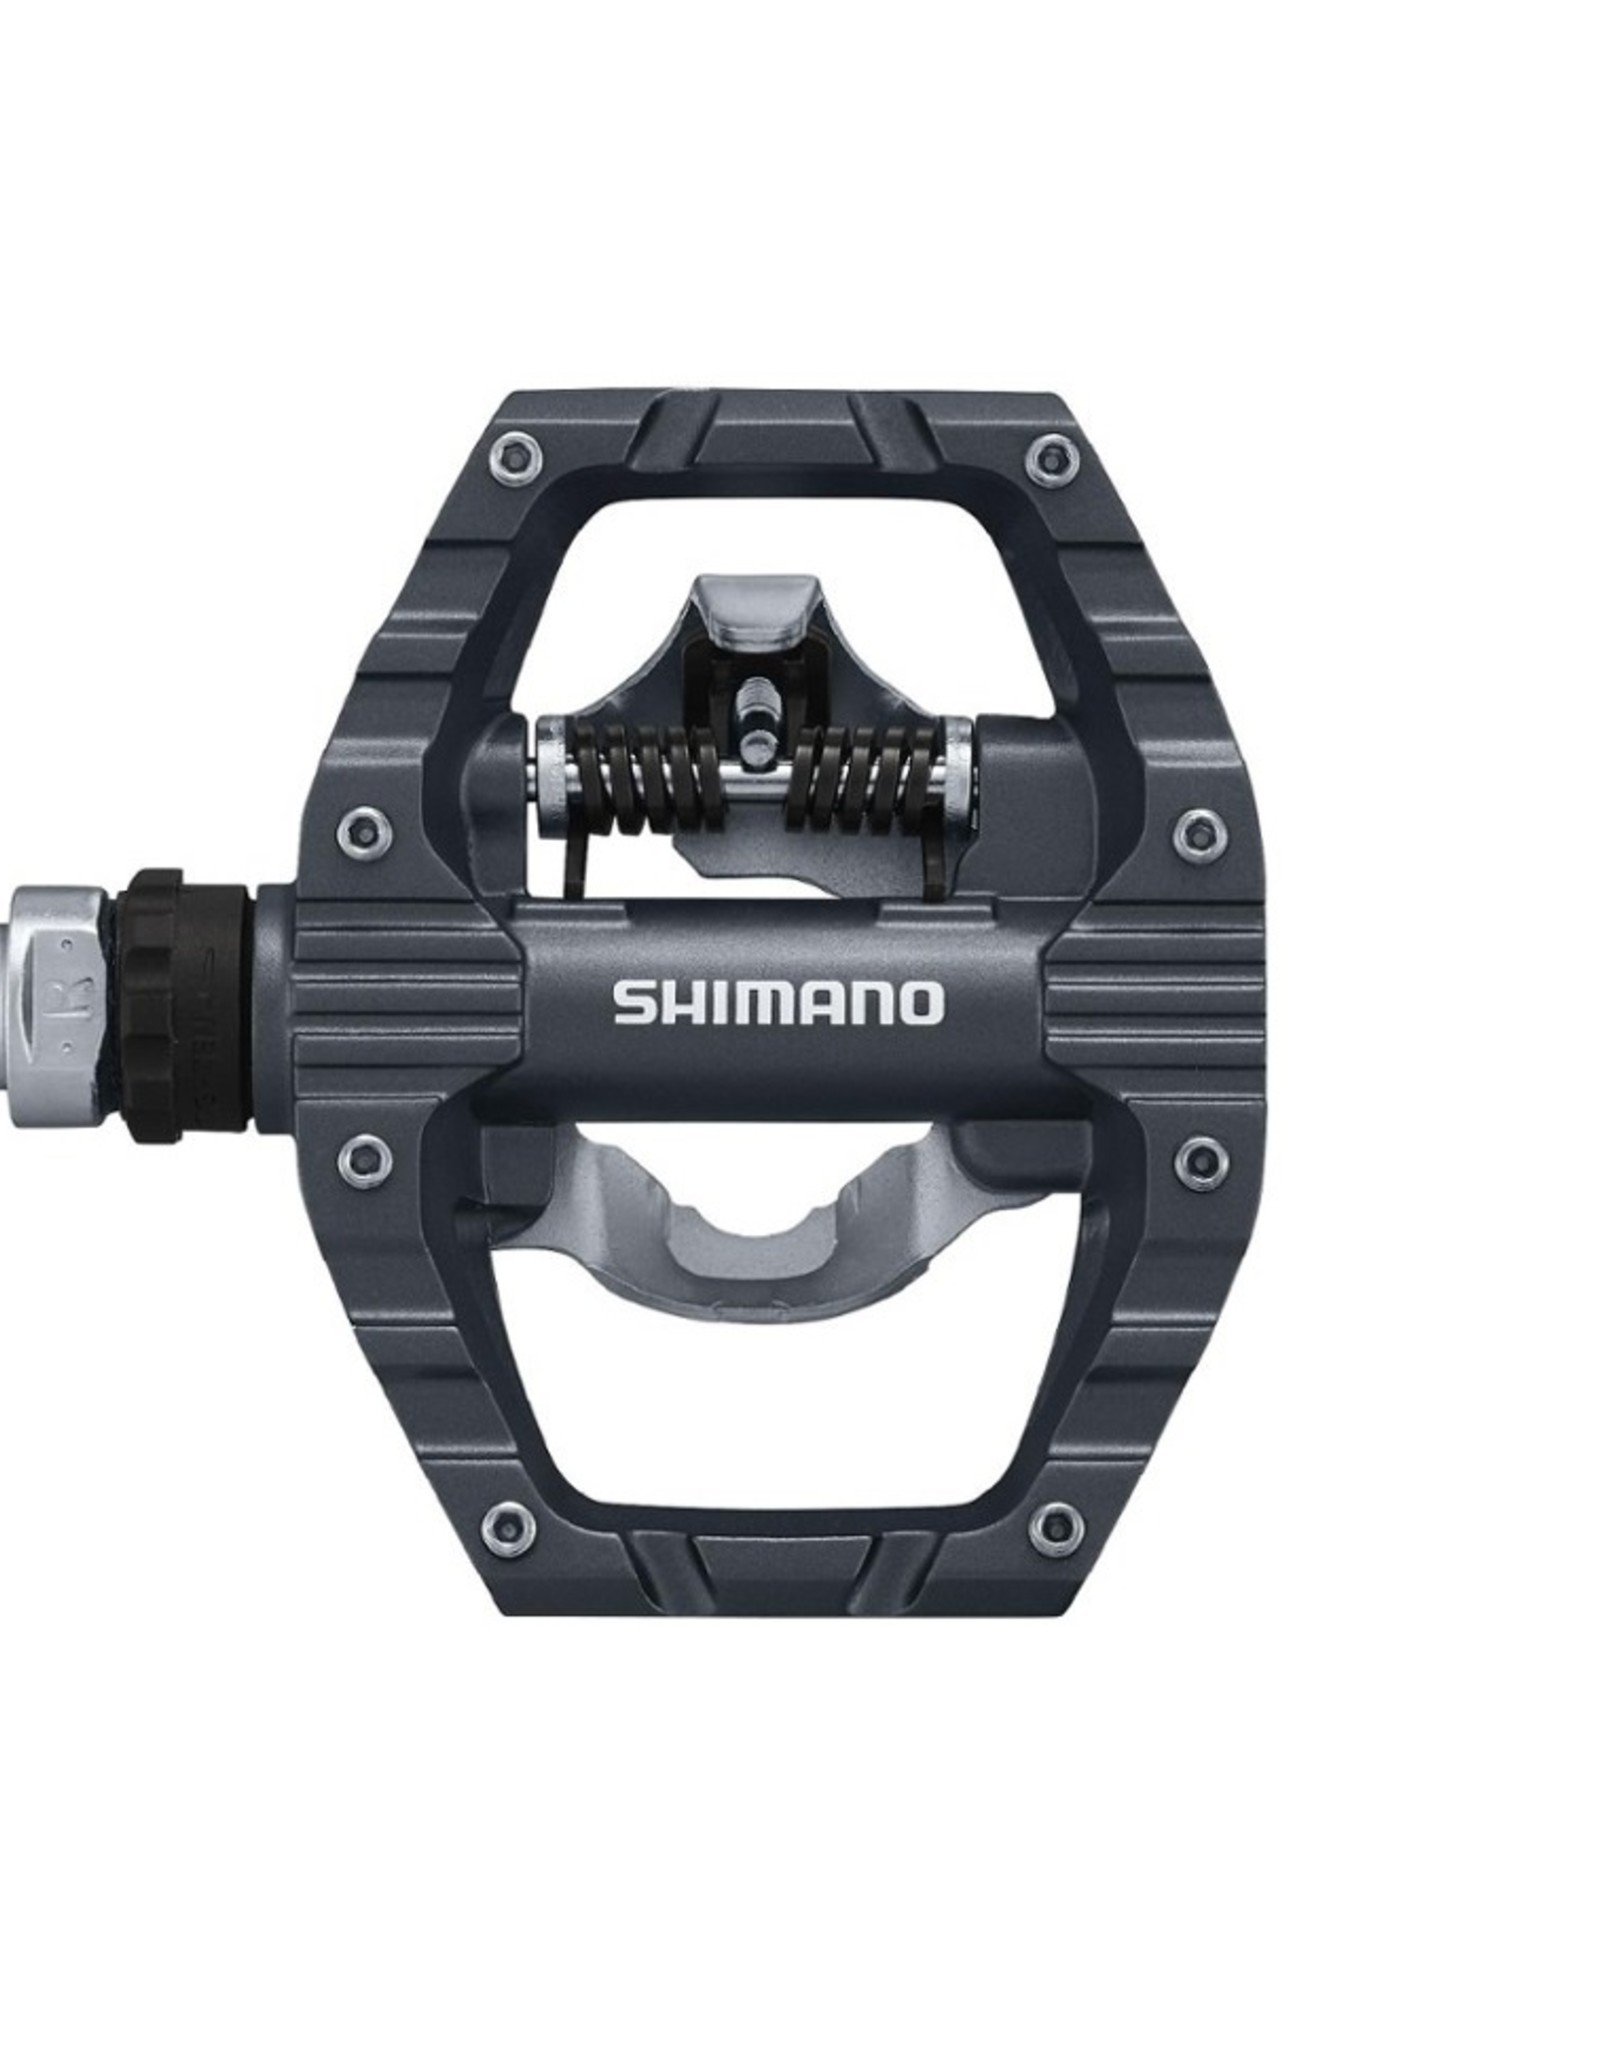 Shimano Pedals - Shimano PD-EH500, SPD Dual pedal